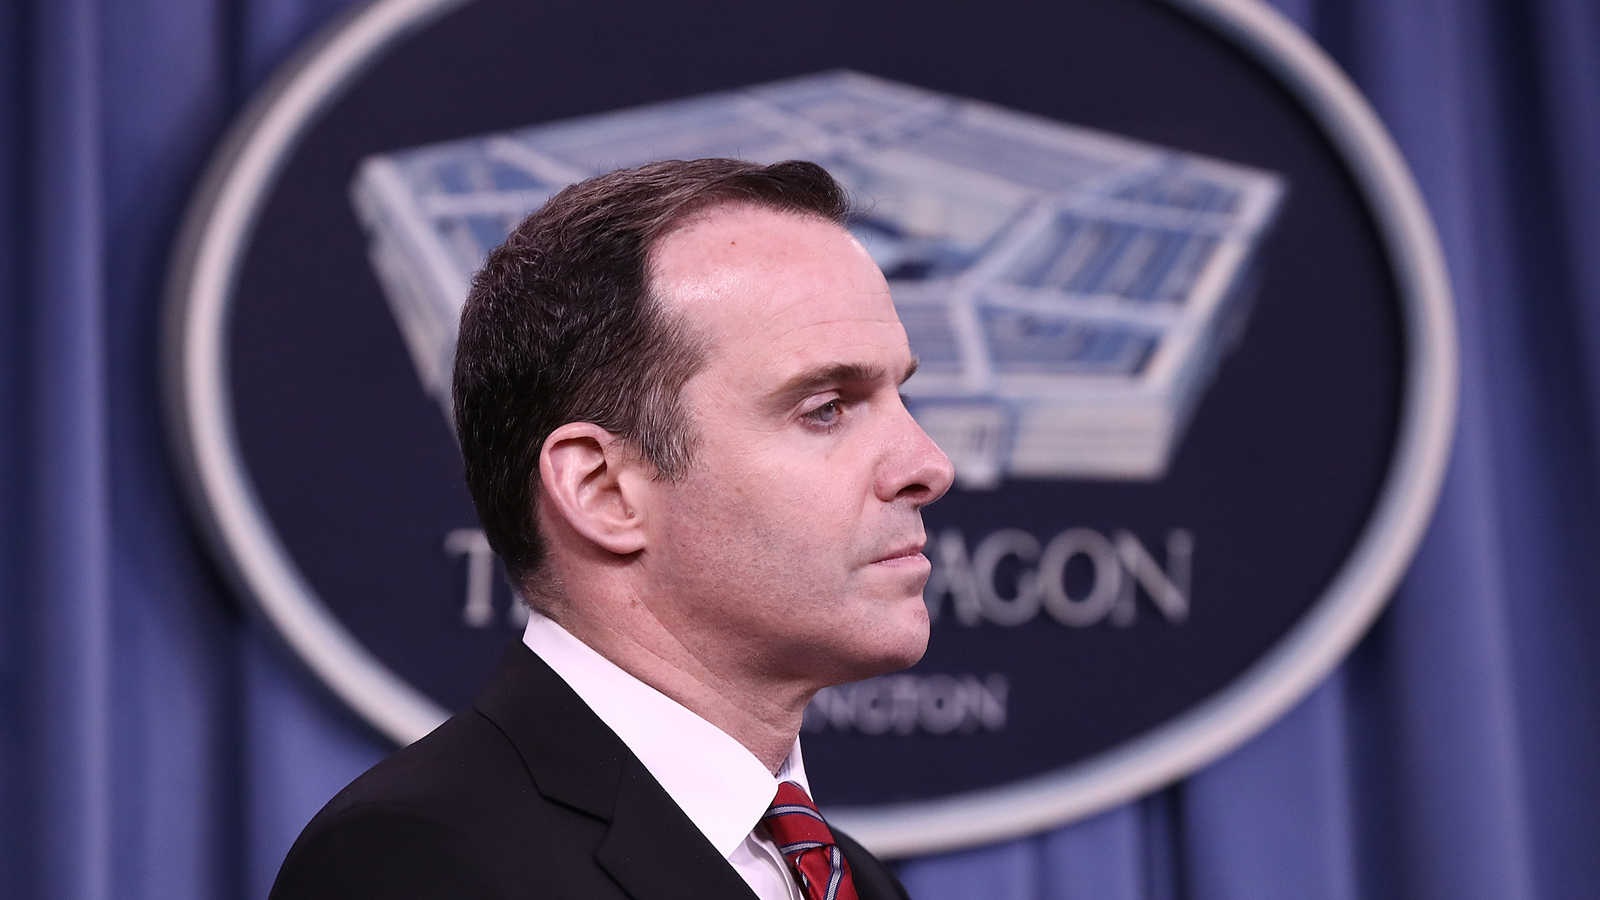 Turkey's scapegoating of McGurk rooted in revisionism / Amberin Zaman